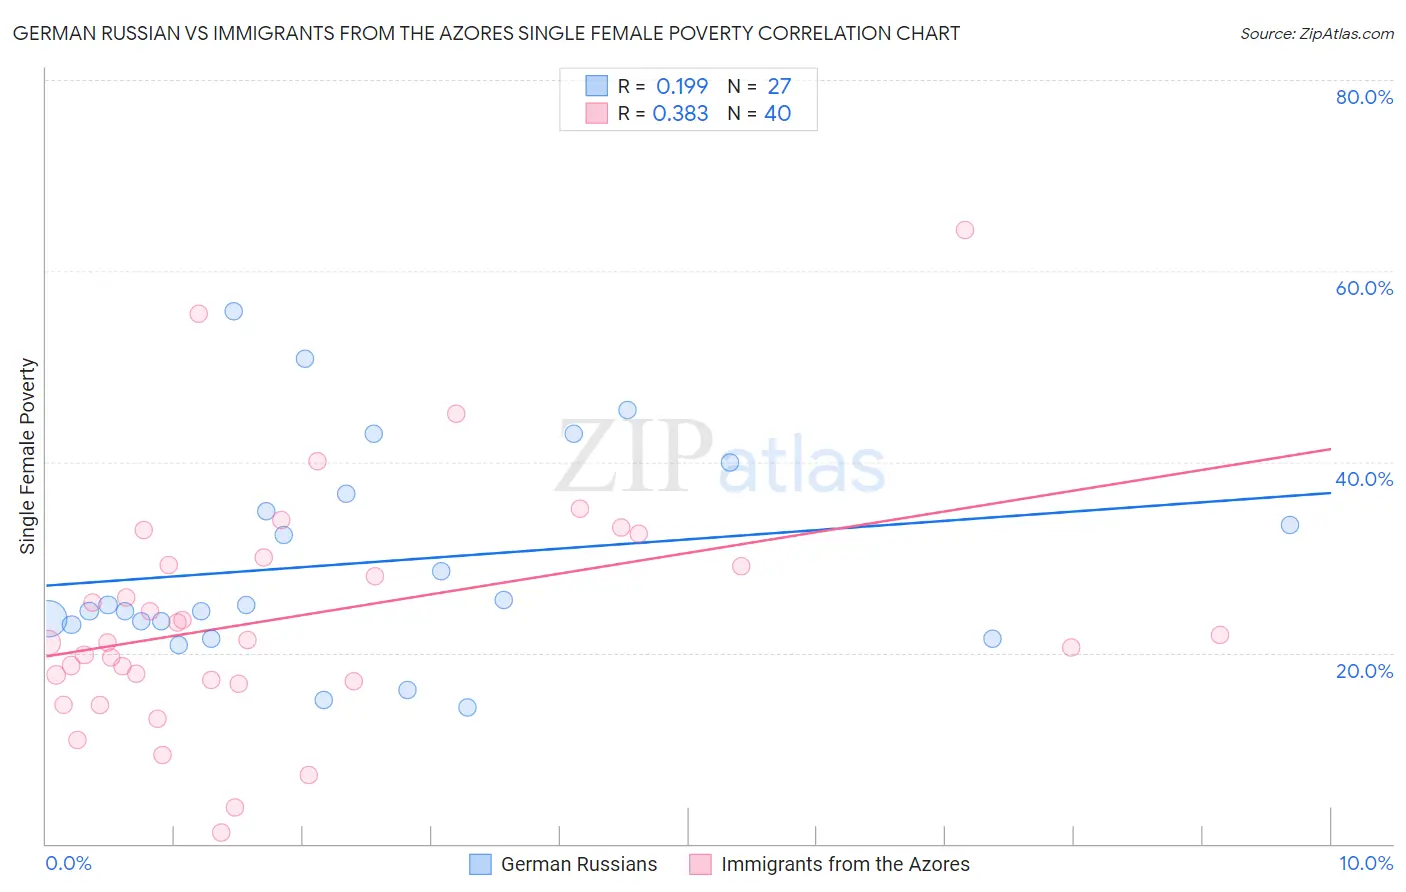 German Russian vs Immigrants from the Azores Single Female Poverty